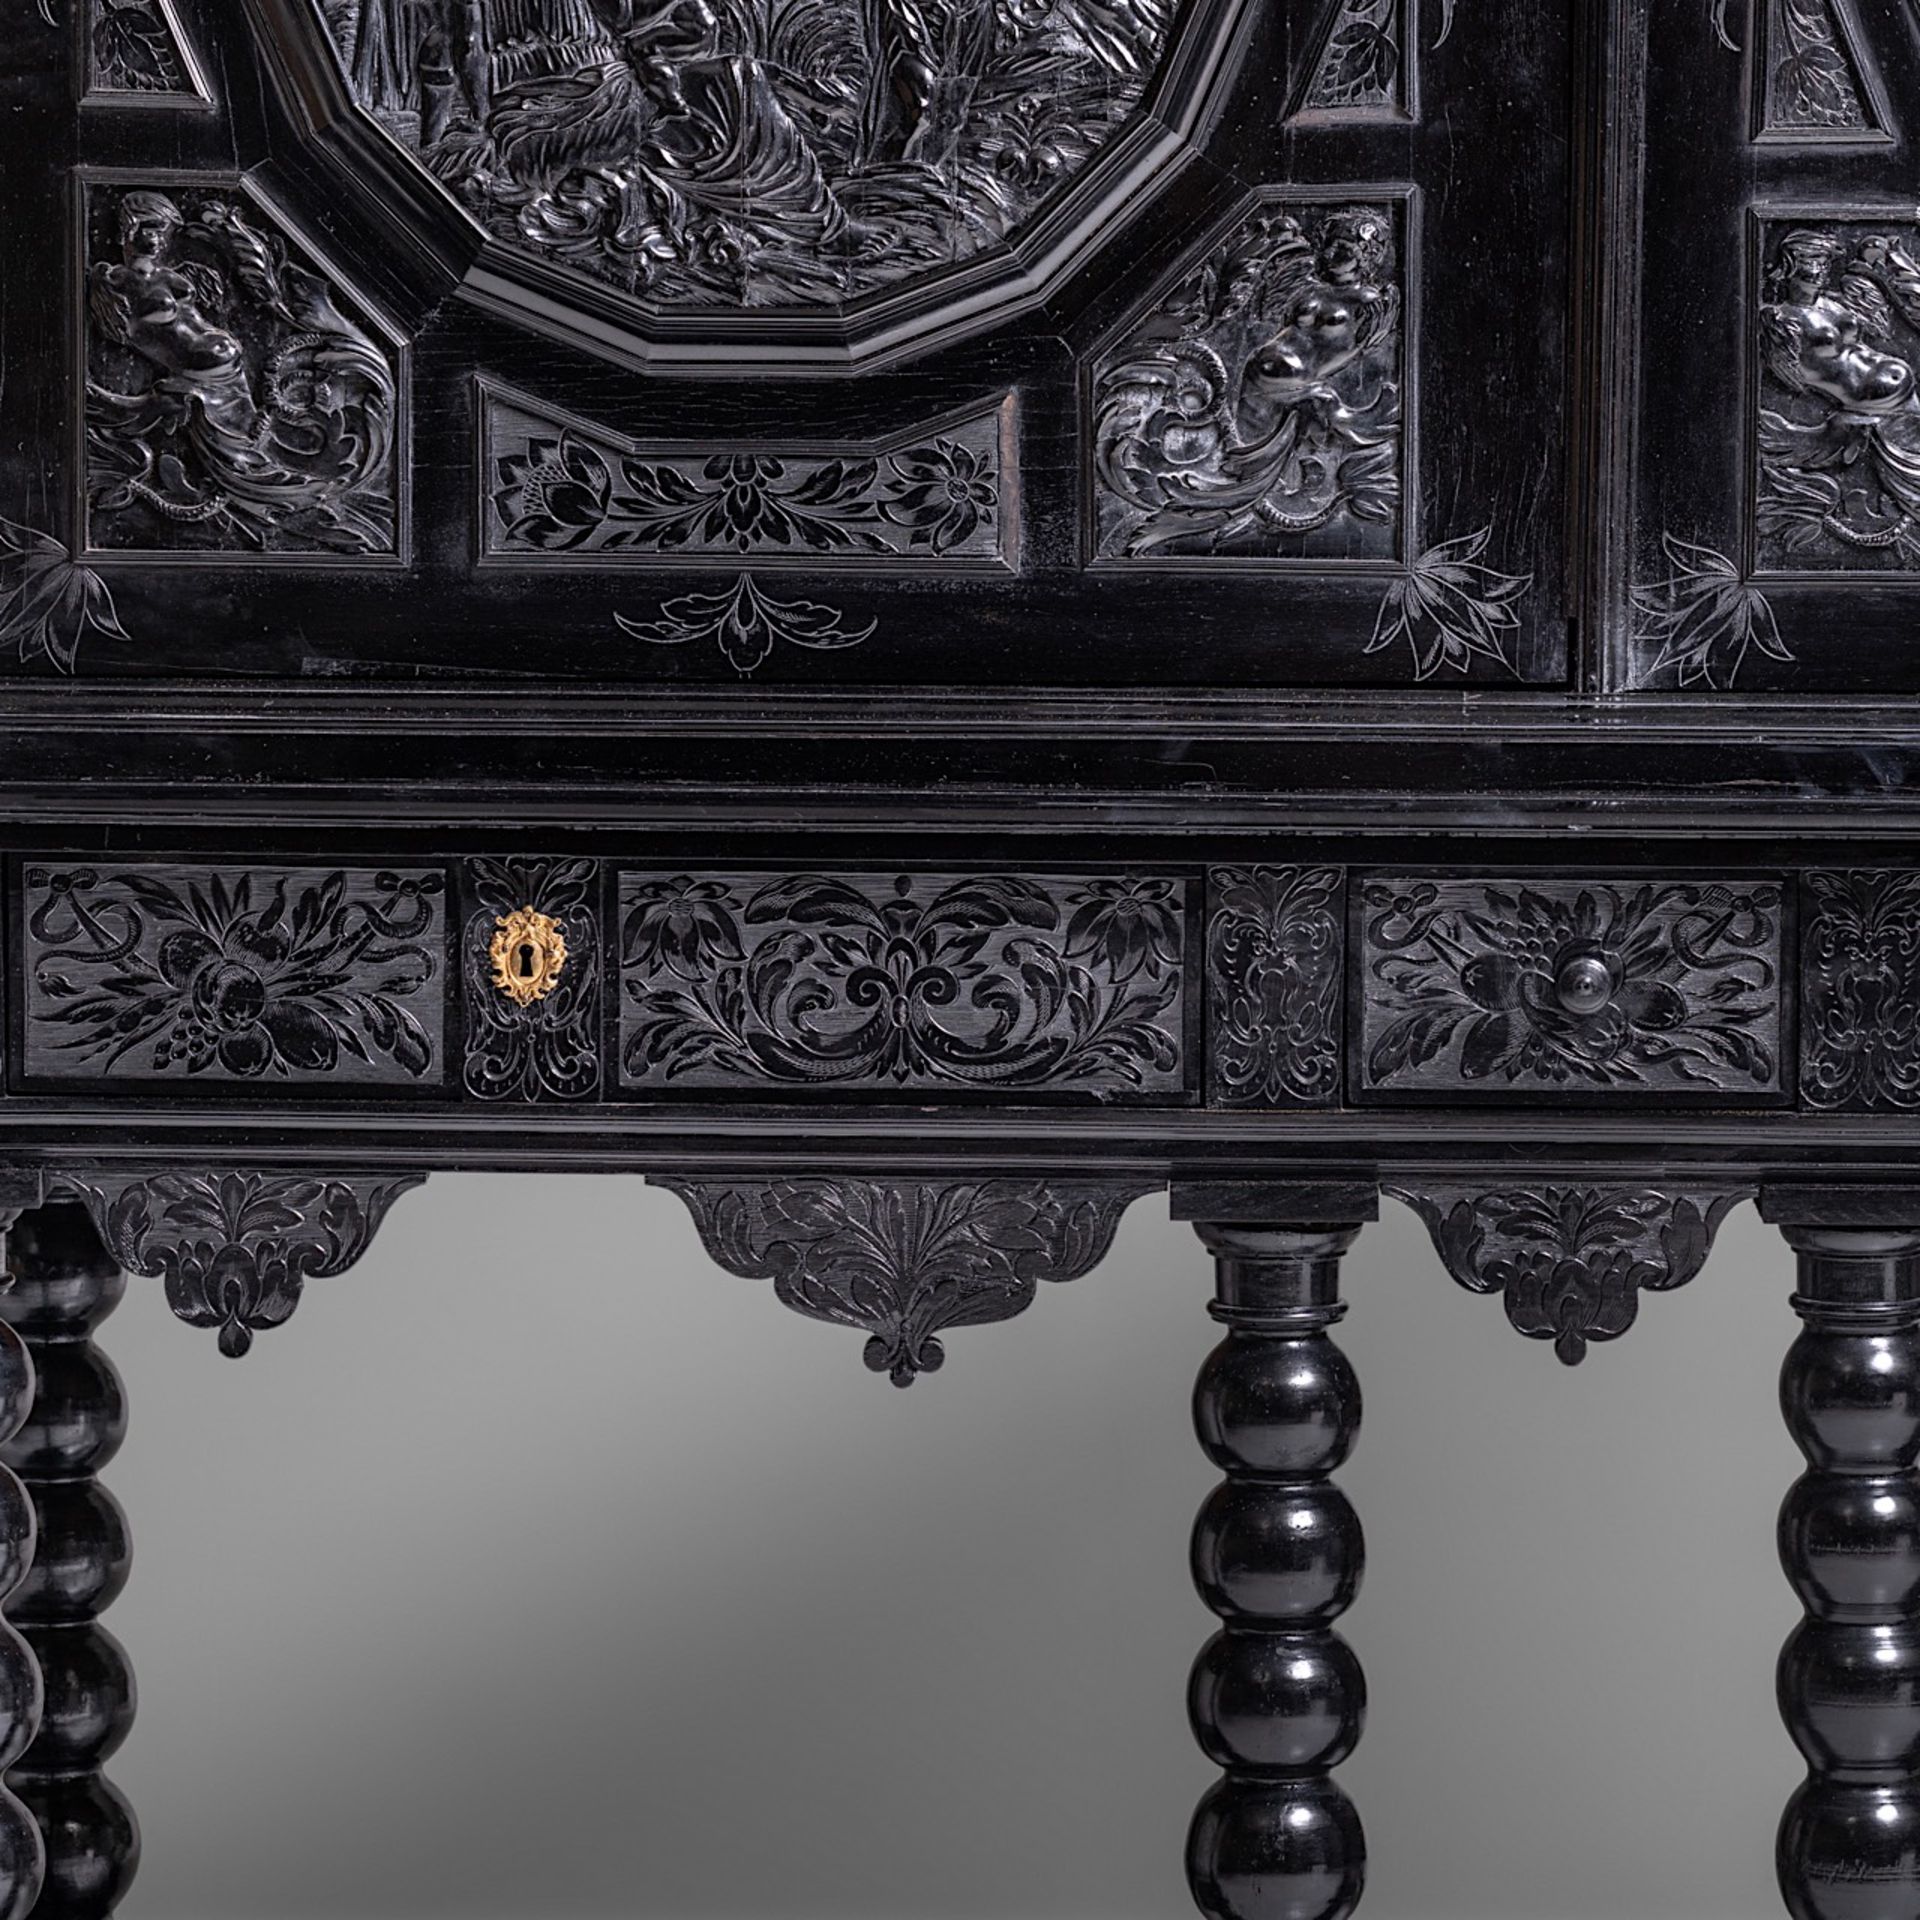 PREMIUM LOT - An exceptional 17thC French ebony and ebonised cabinet-on-stand, H 181,5 - W 163 - D 5 - Bild 14 aus 14